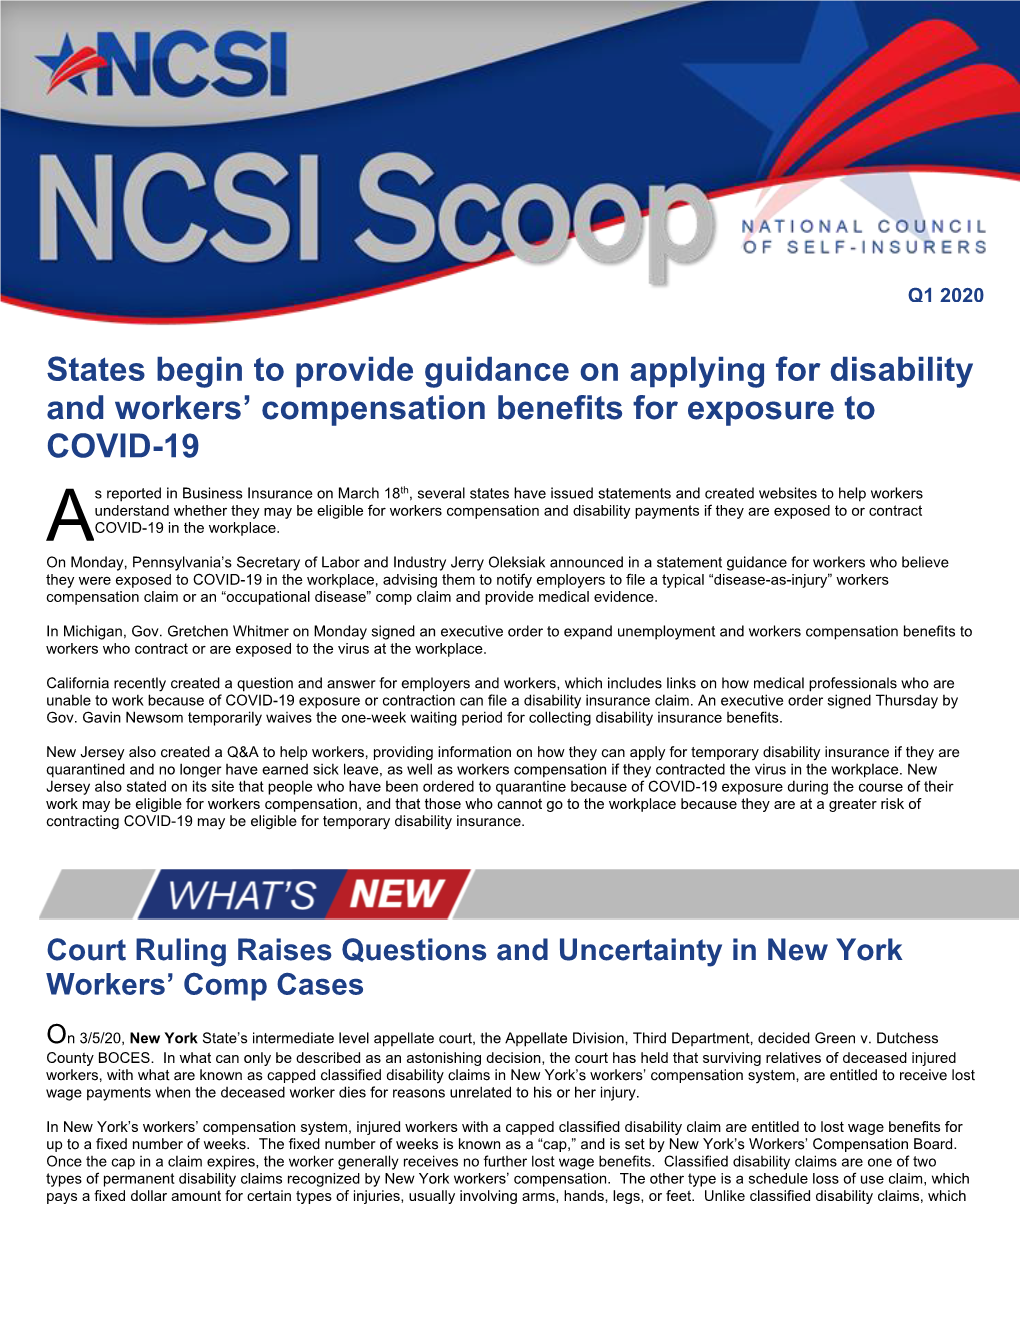 States Begin to Provide Guidance on Applying for Disability and Workers’ Compensation Benefits for Exposure to COVID-19